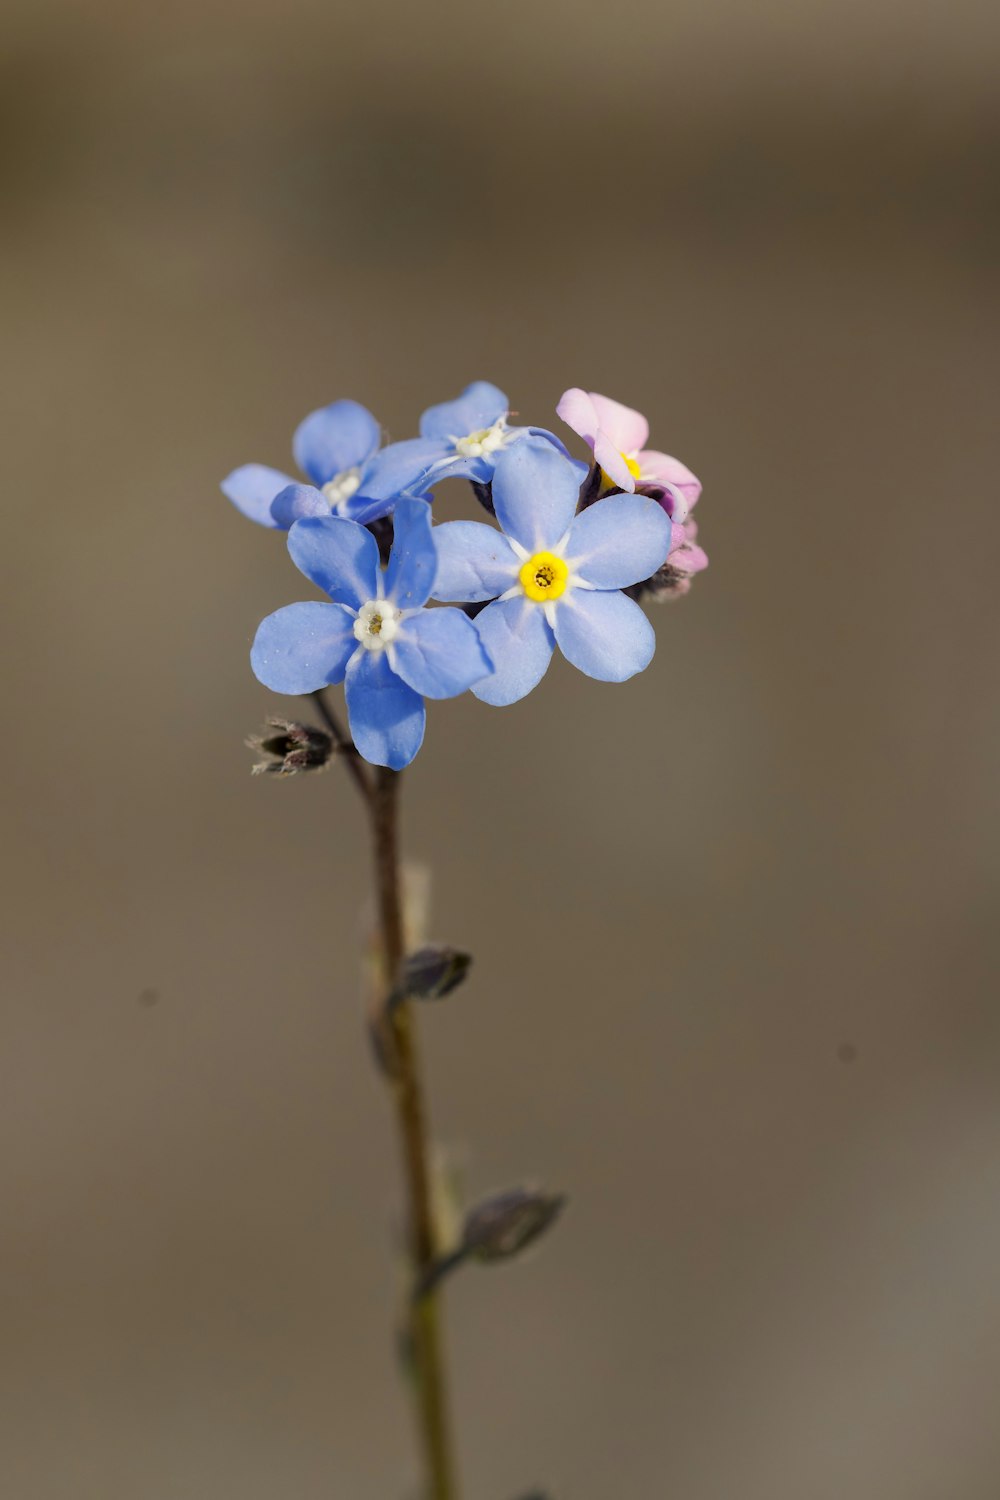 a small blue flower with yellow and pink petals